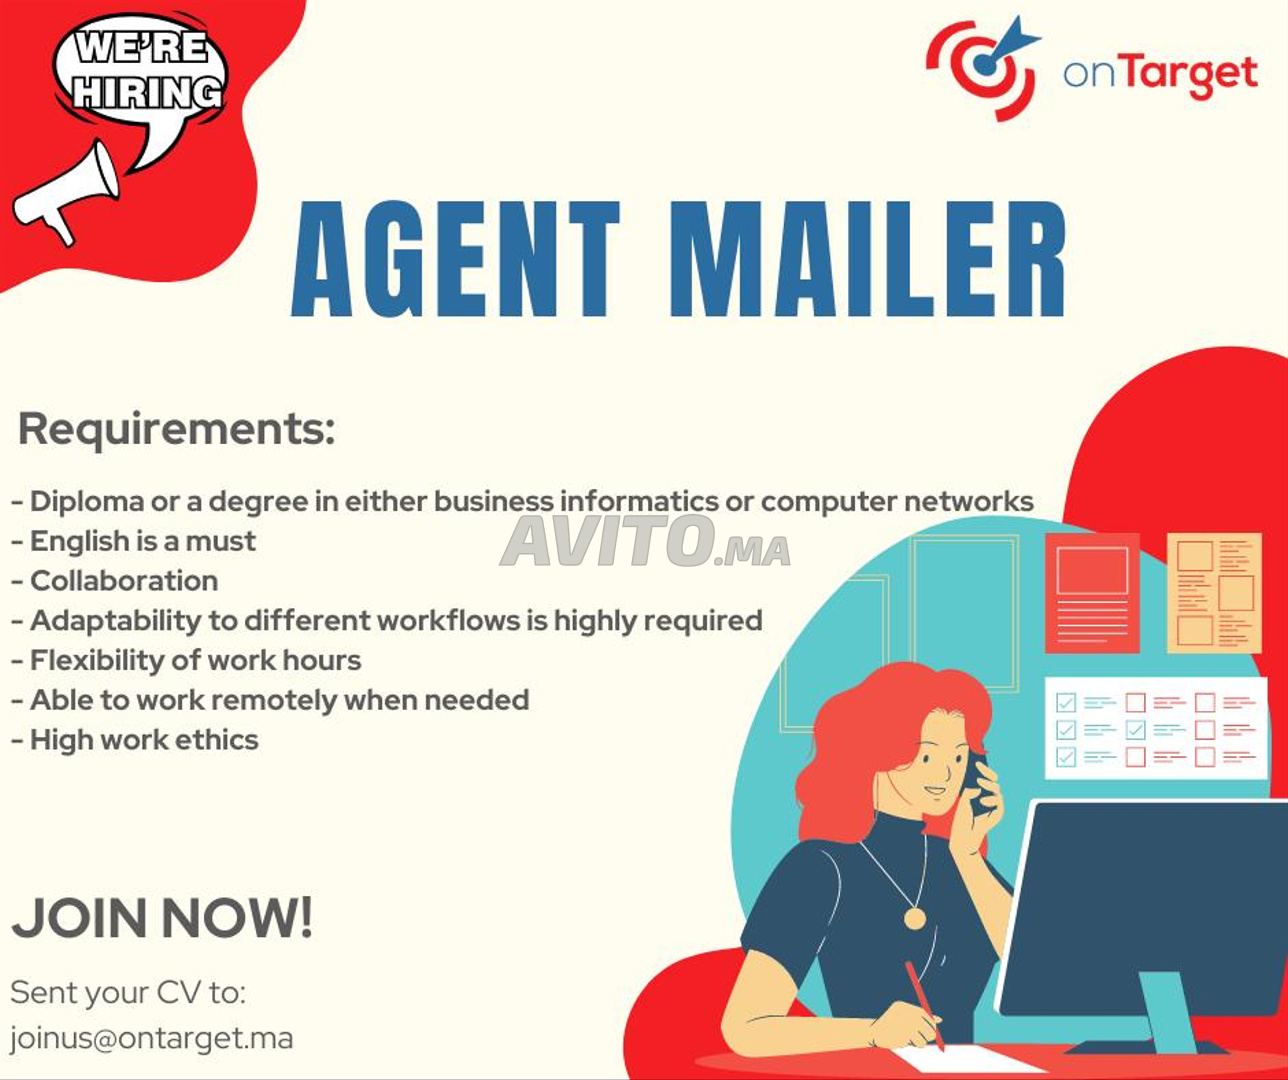 We are hiring - Agents Mailer - 1